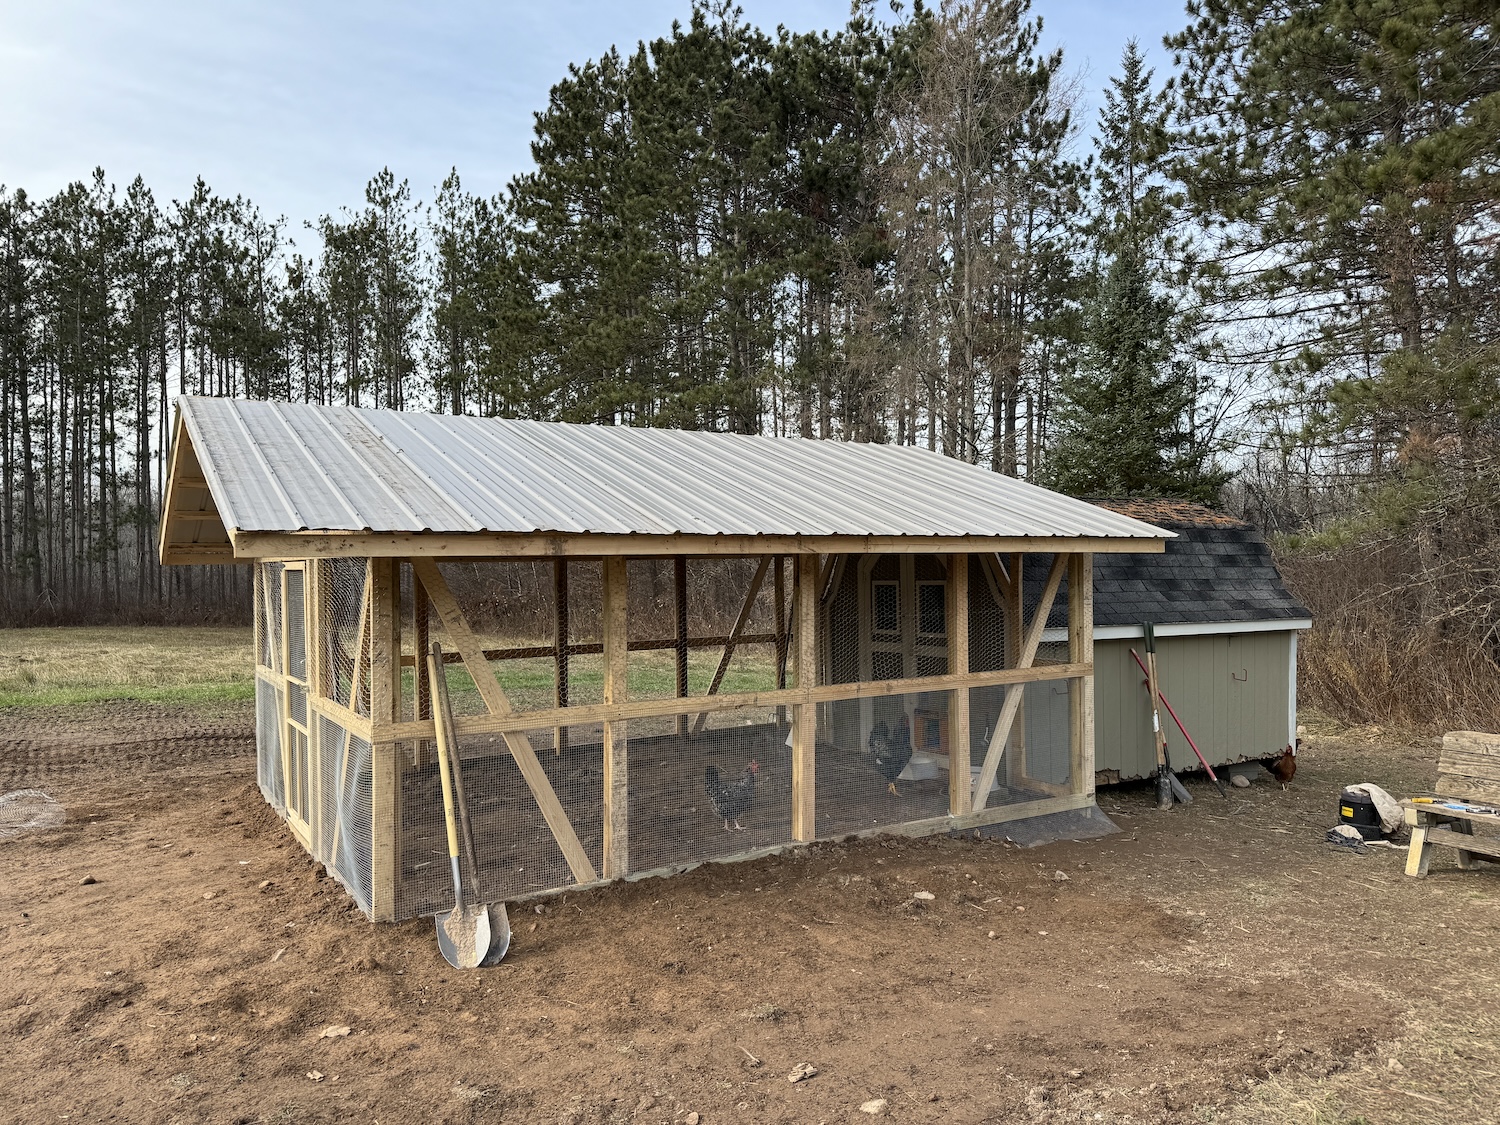 A closed chicken coop and run to prevent free ranging